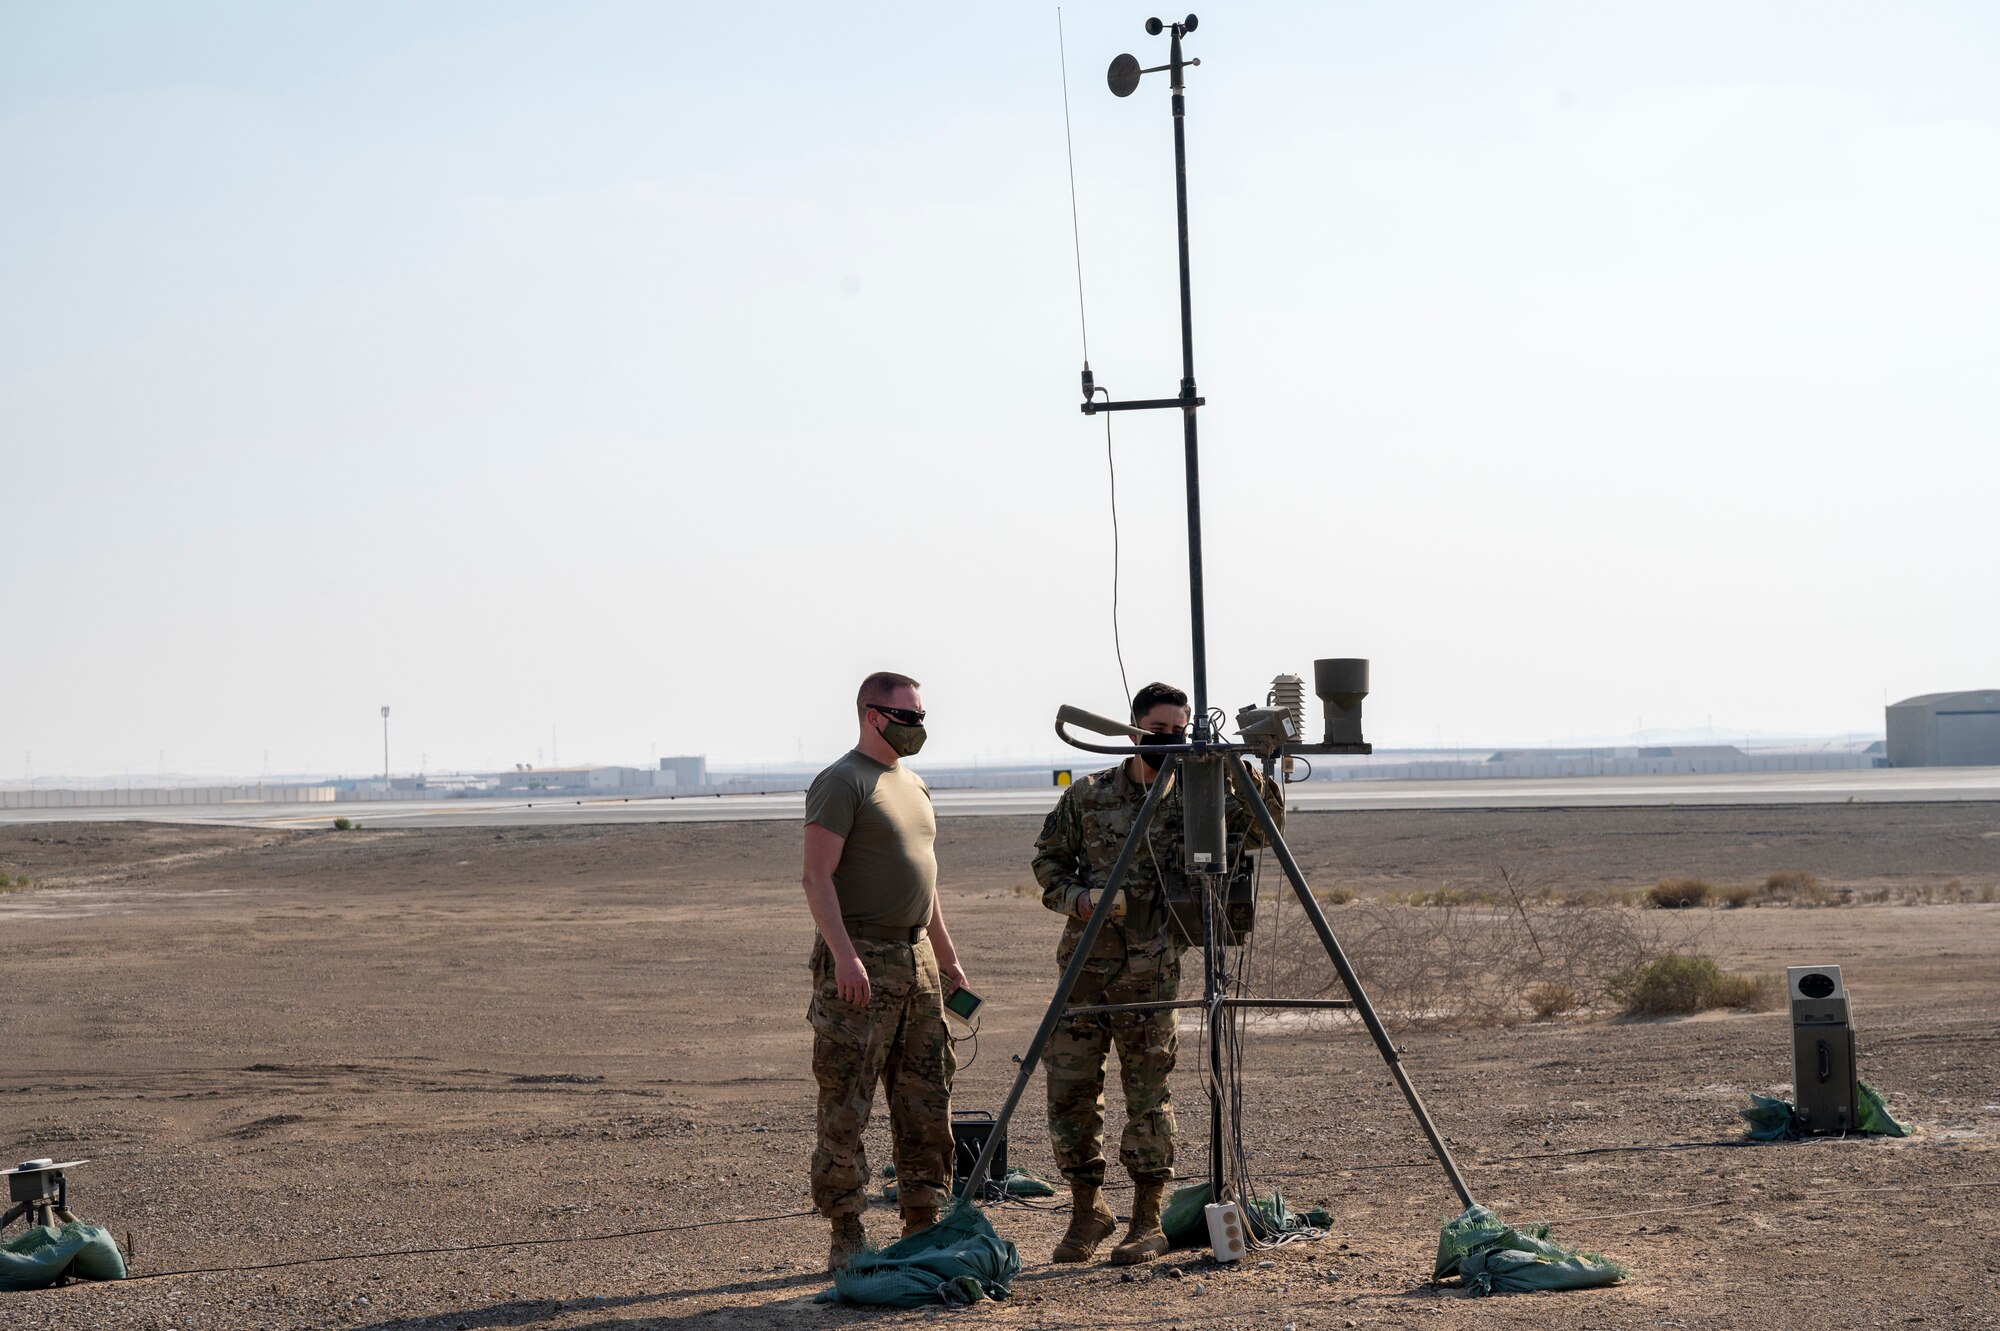 U.S. Air Force Master Sgt. Adam Garrison (left), 380th Expeditionary Operations Support Squadron (EOSS) weather flight chief, and U.S. Air Force Senior Airman Ricardo Solis-Arroyo (right), 380th EOSS weather forecaster, install a newer Tactical Meteorological Observing System (TMOS) at Al Dhafra Air Base, United Arab Emirates, Dec. 23, 2020.